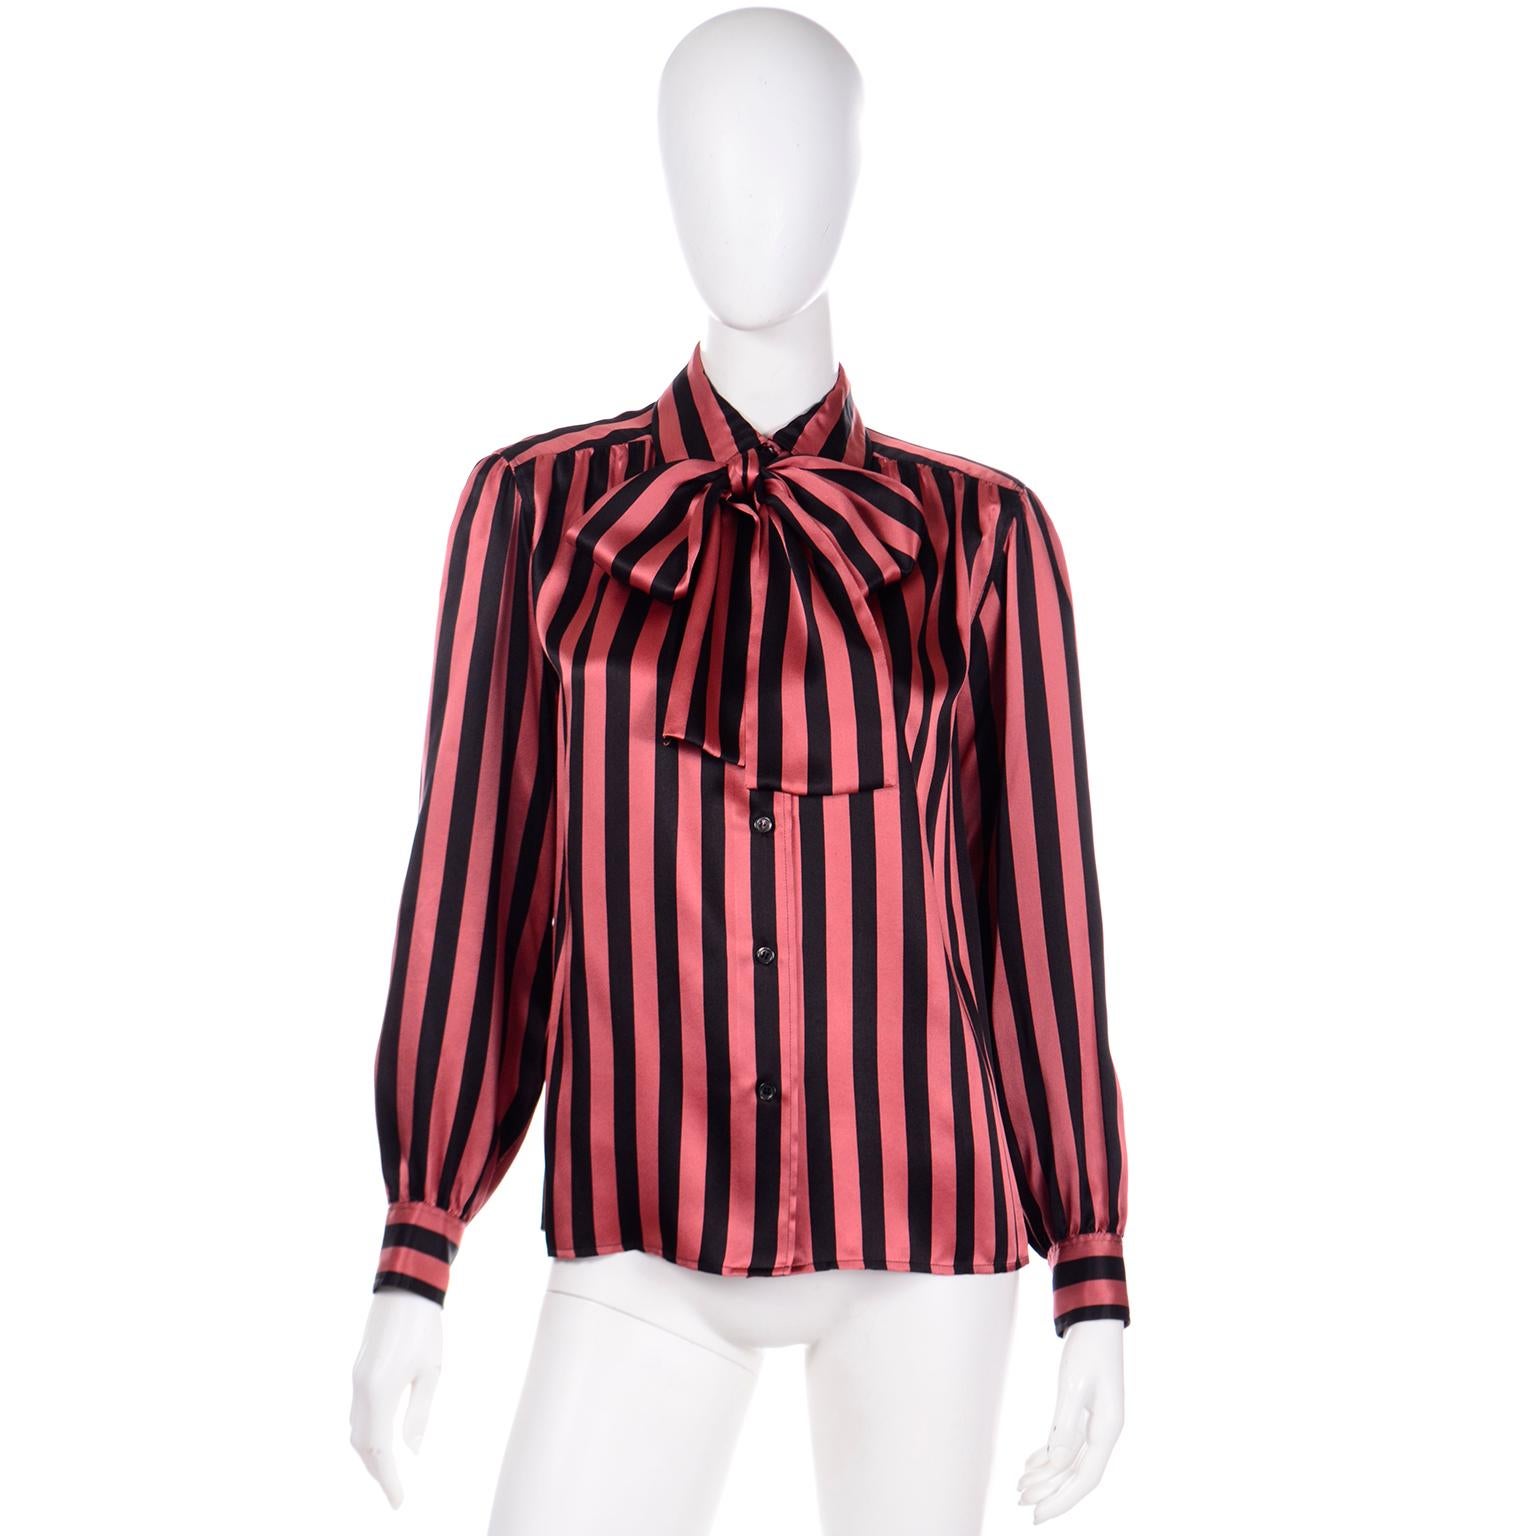 This early 1980's YSL vintage blouse is in a luxe silk in an orange and black striped print. Yves Saint Laurent was a prolific designer and he paid attention to even the smallest detail in his pieces. His vintage blouses are some of the most